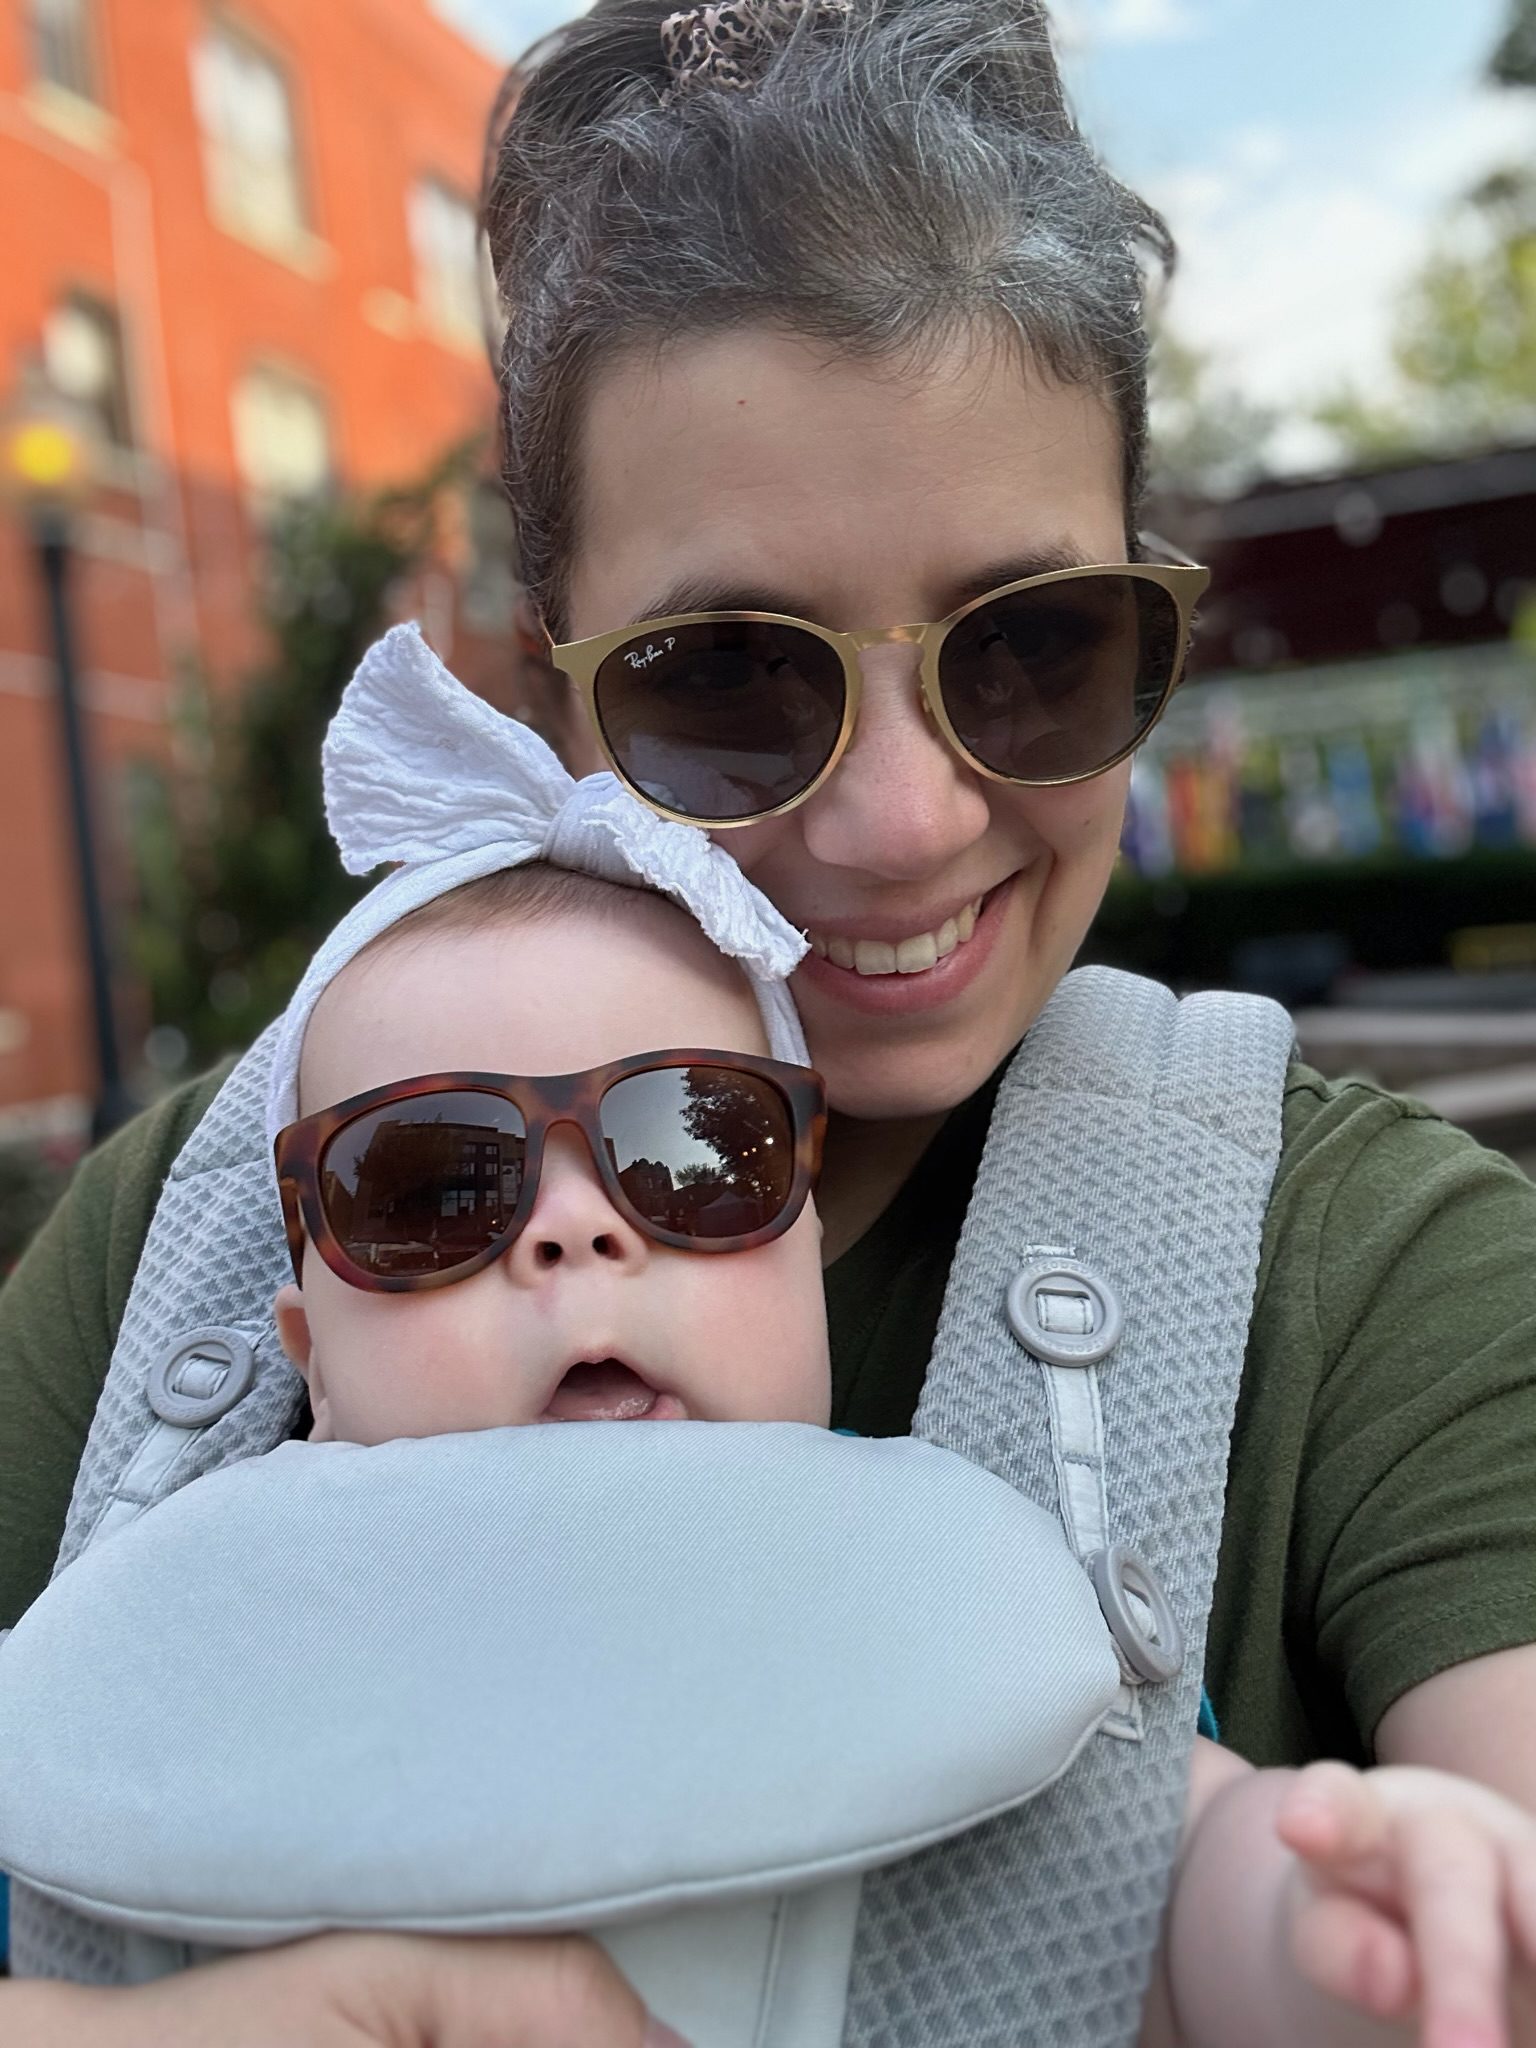 moya with a baby strapped to her chest smiling, both wearing sunglasses